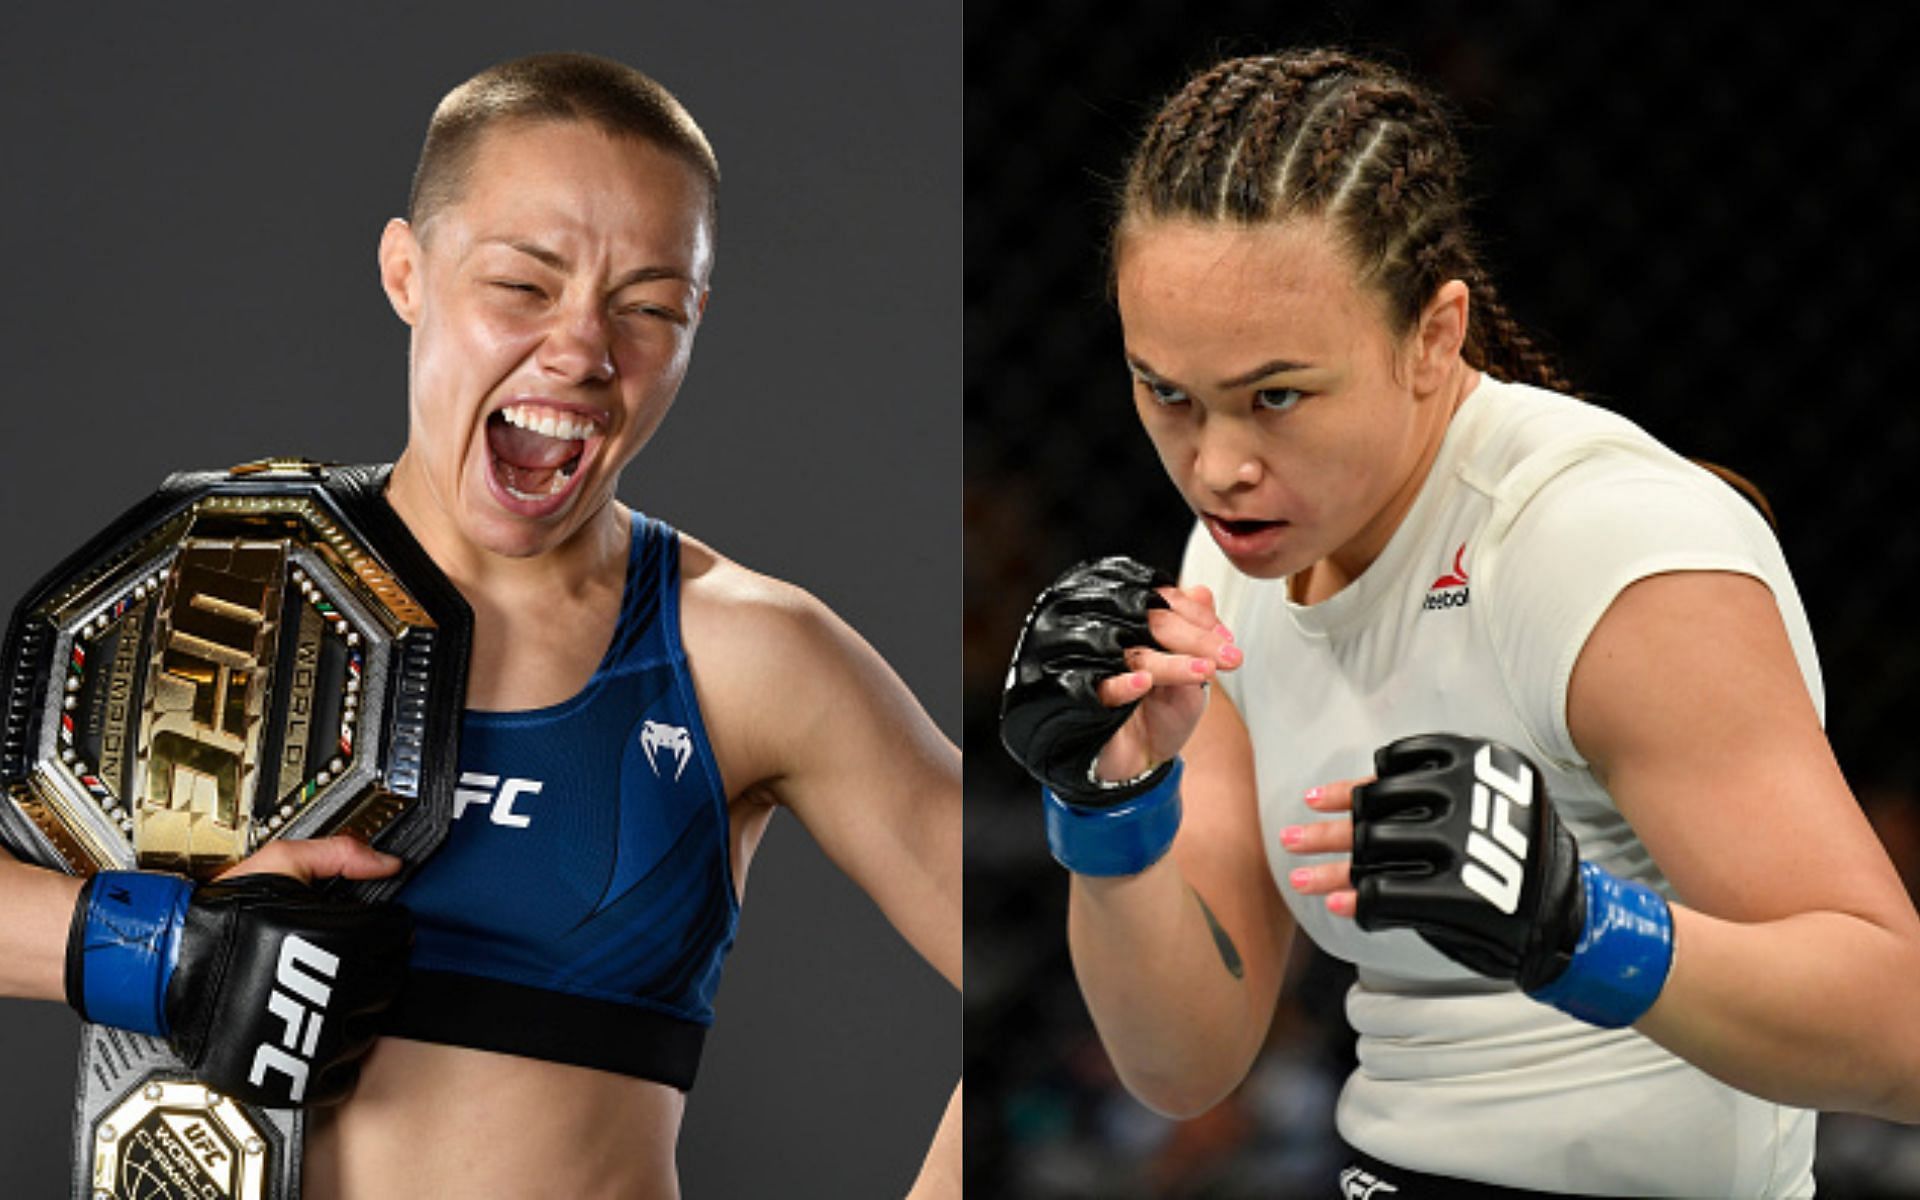 "The strawweight division is up in the air right now" - Michelle Waterson...